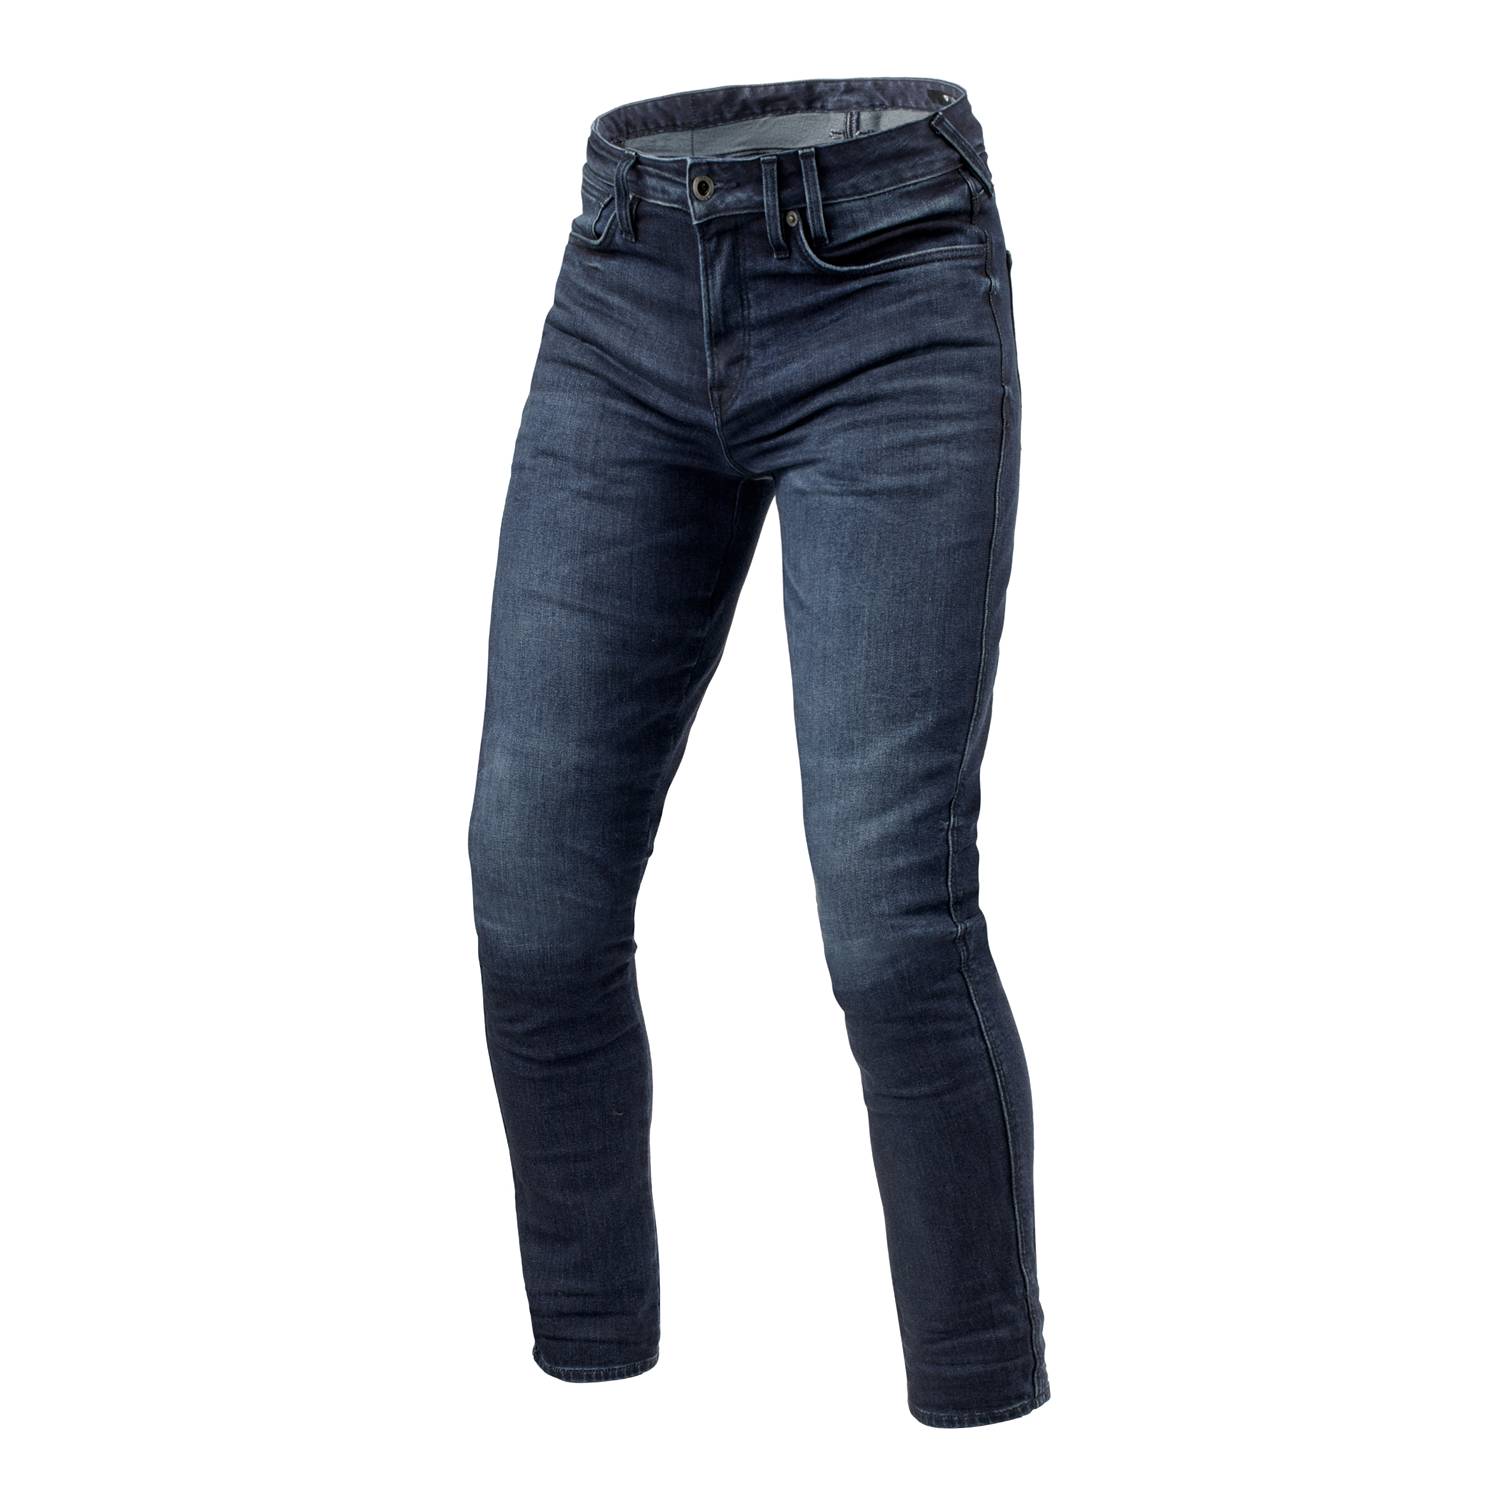 Image of EU REV'IT! Jeans Carlin SK Dark Blue Used L32 Motorcycle Jeans Taille L32/W32